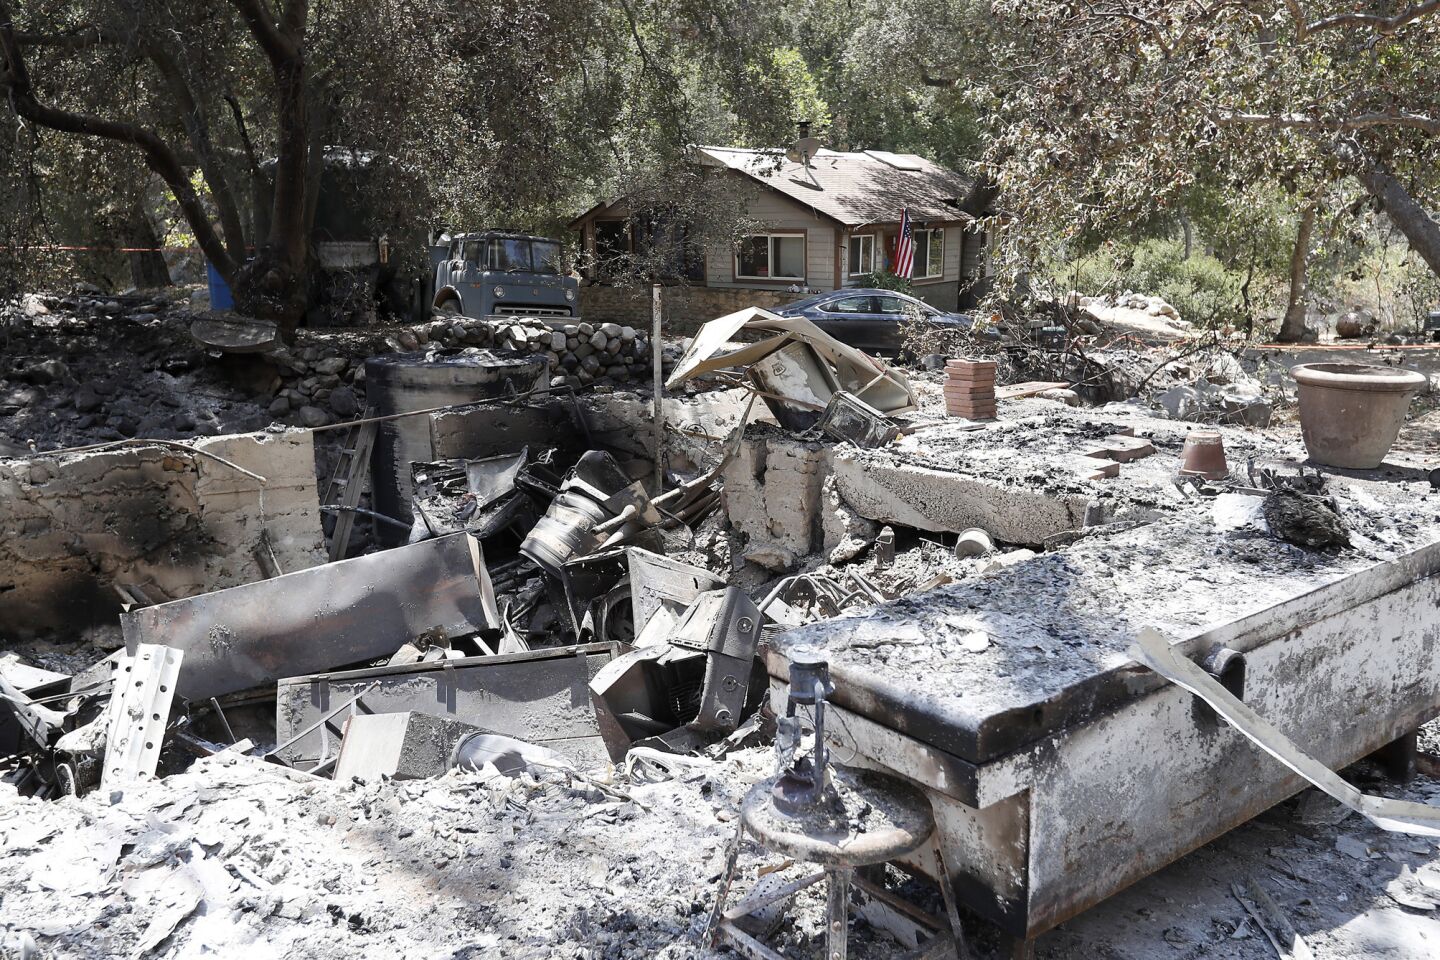 The Trabuco Canyon home of arson suspect Forrest Gordon Clark, 51, stands untouched amid charred remains in his neighborhood.